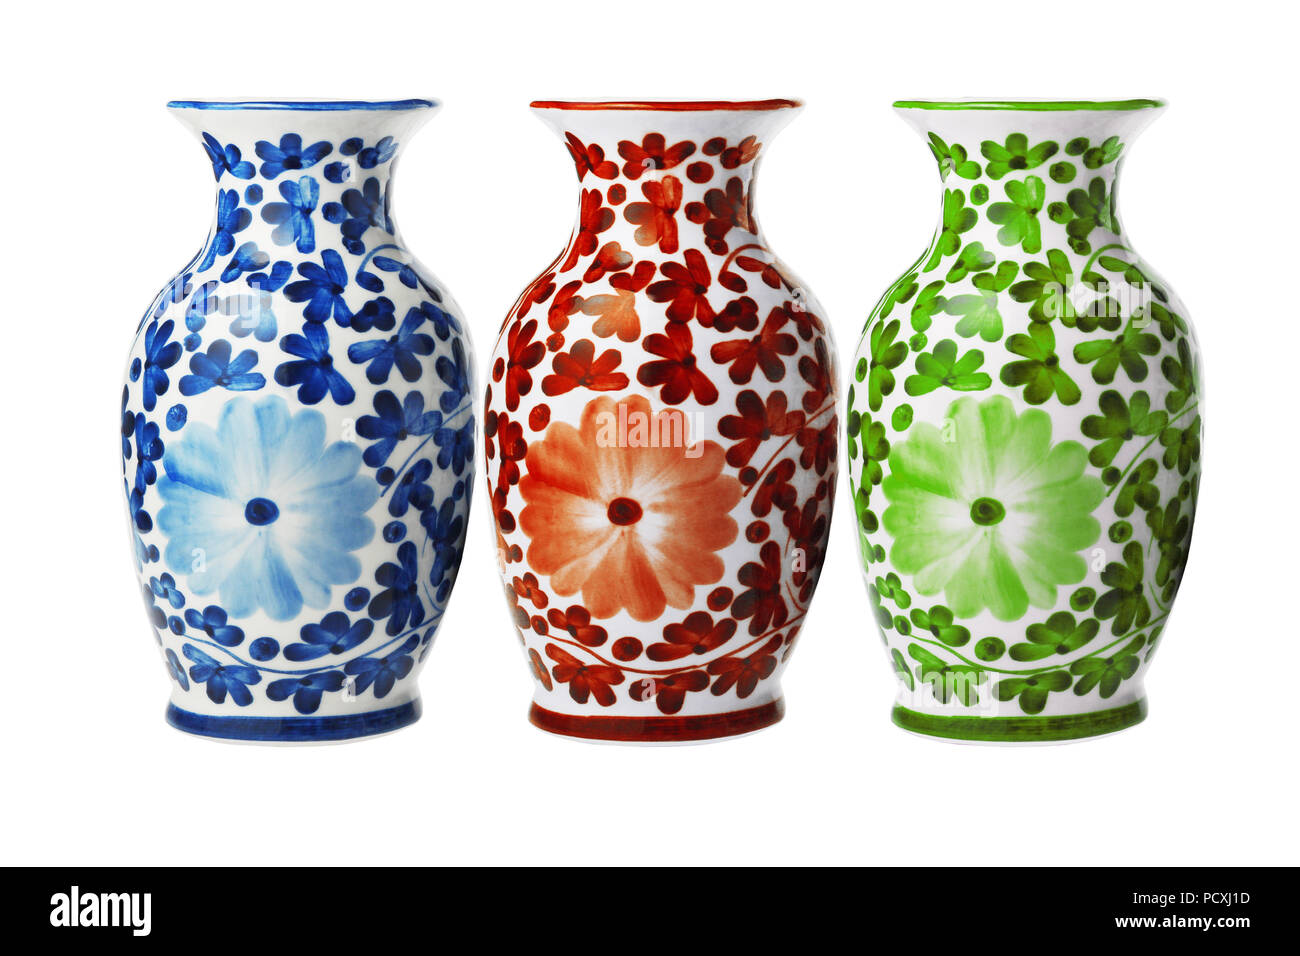 Row of Chinese Porcelain Floral Vases on White Background Stock Photo